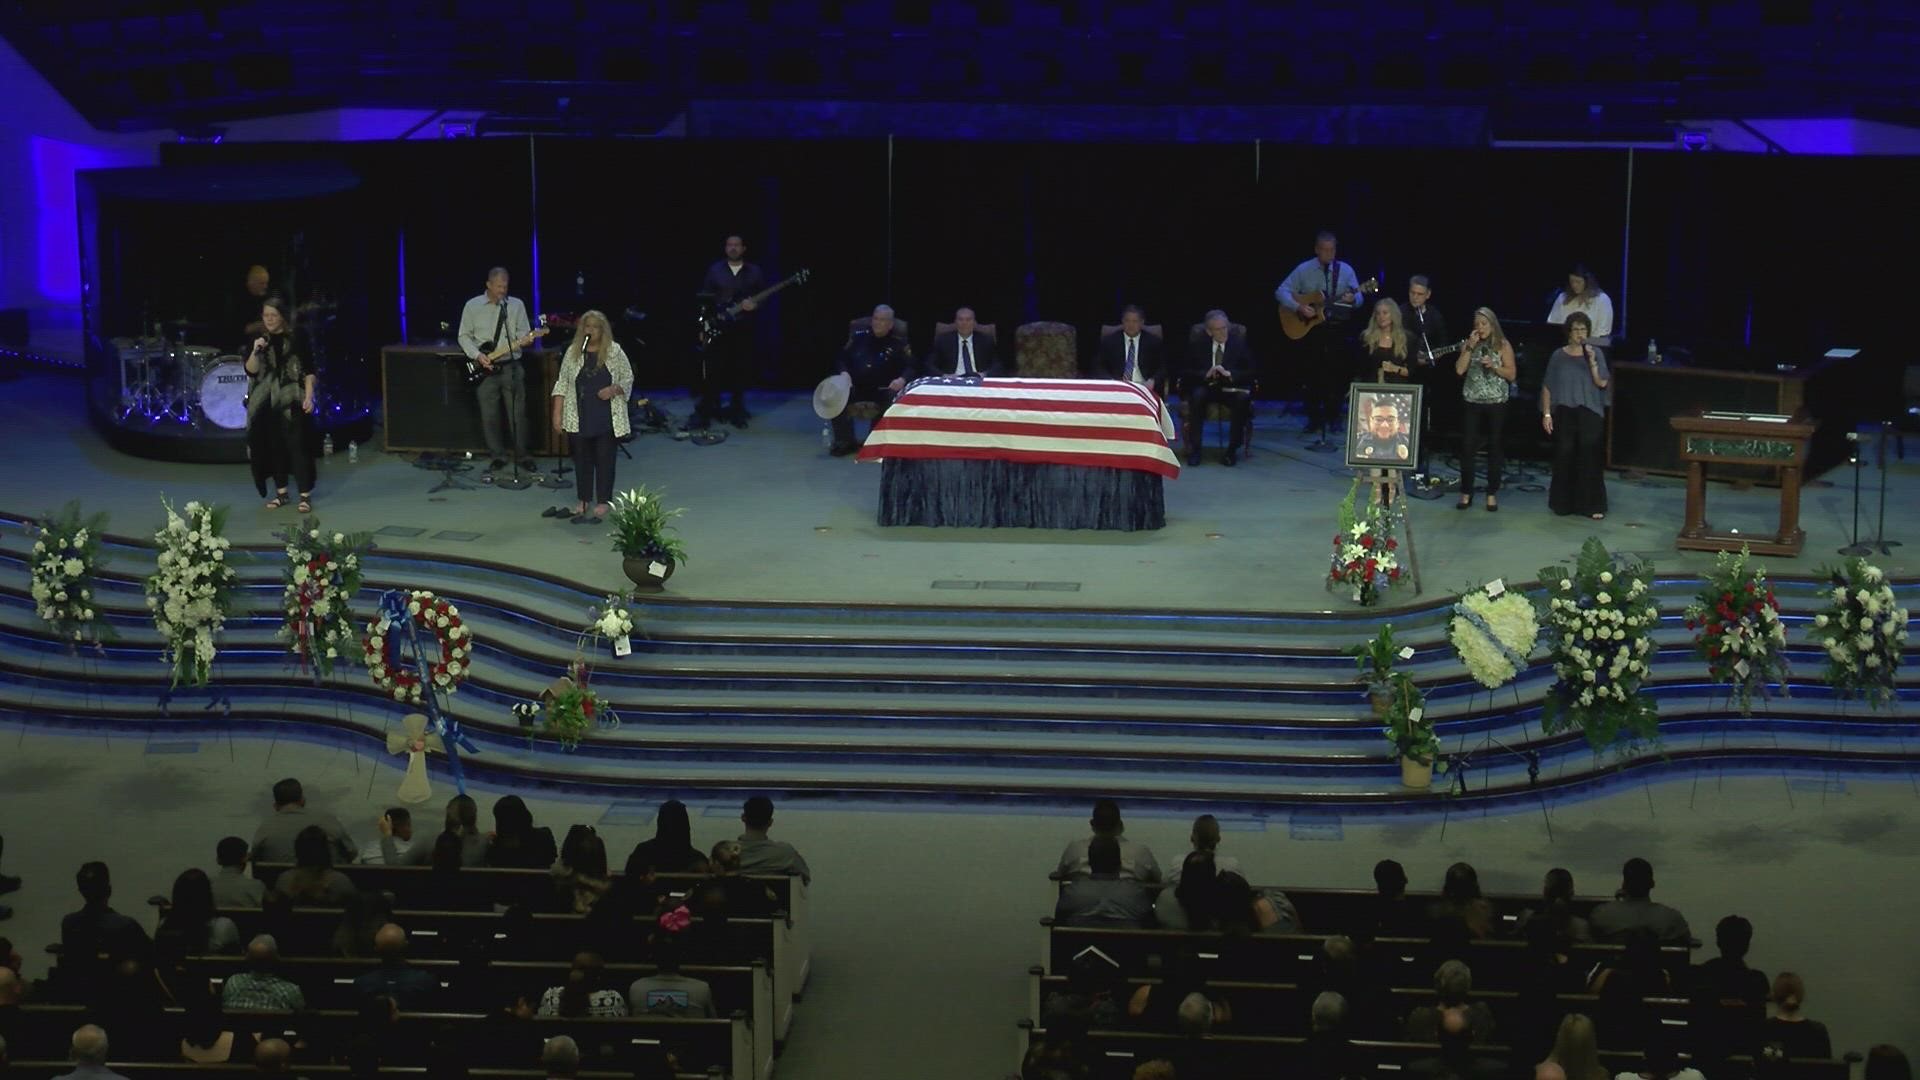 Smith County sheriff delivers speech to honor fallen Deputy Bustos at funeral service